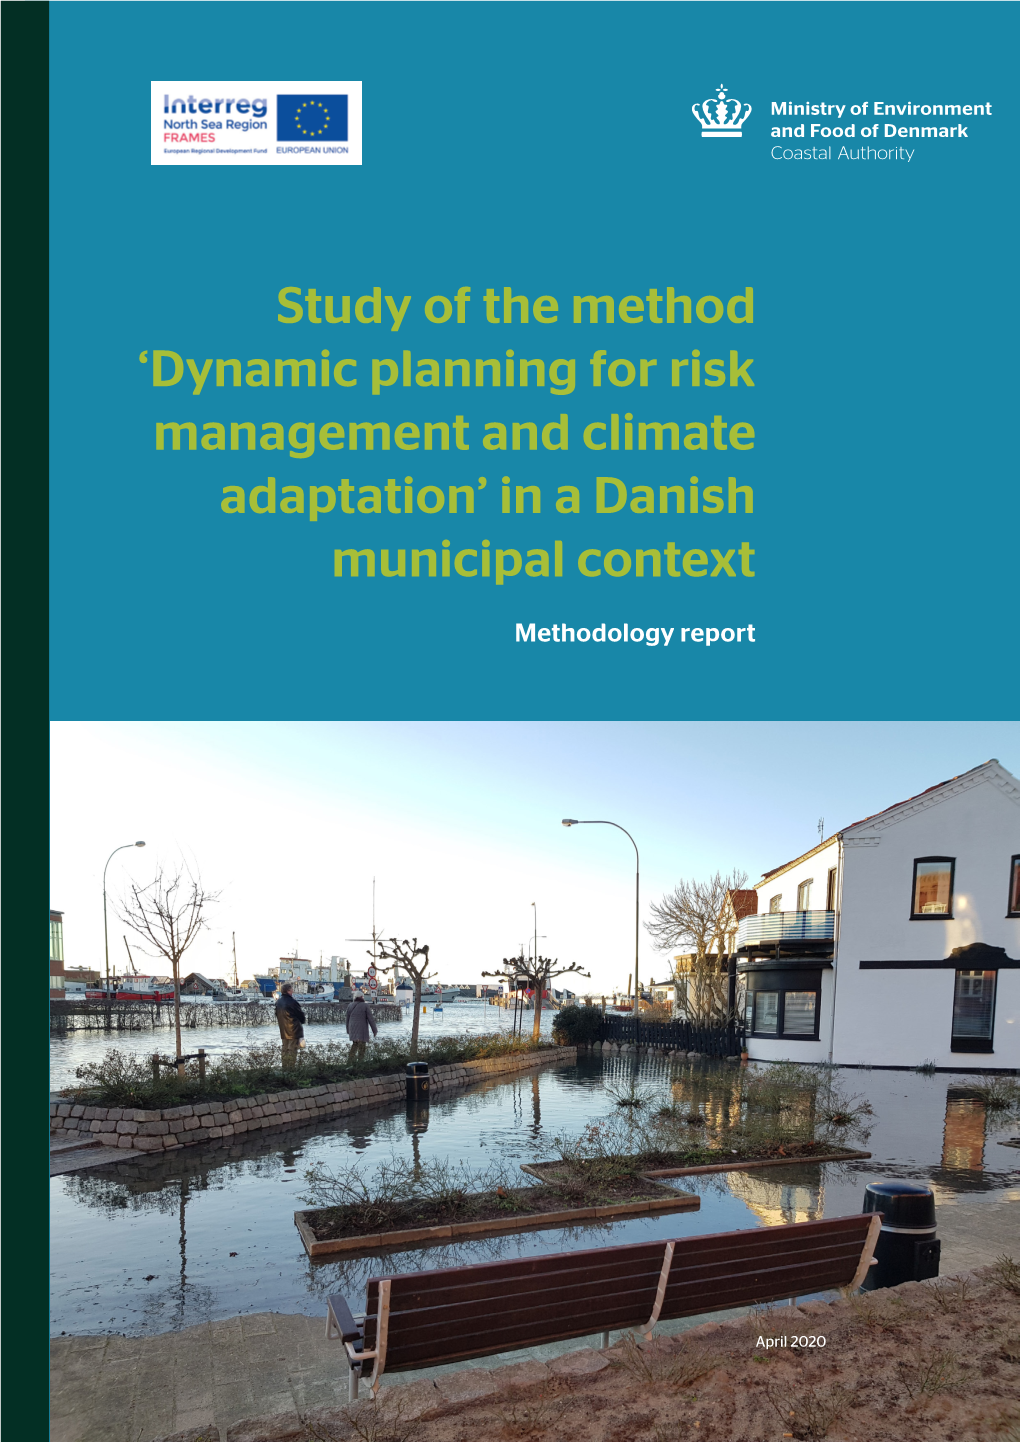 Dynamic Planning for Risk Management and Climate Adaptation’ in a Danish Municipal Context